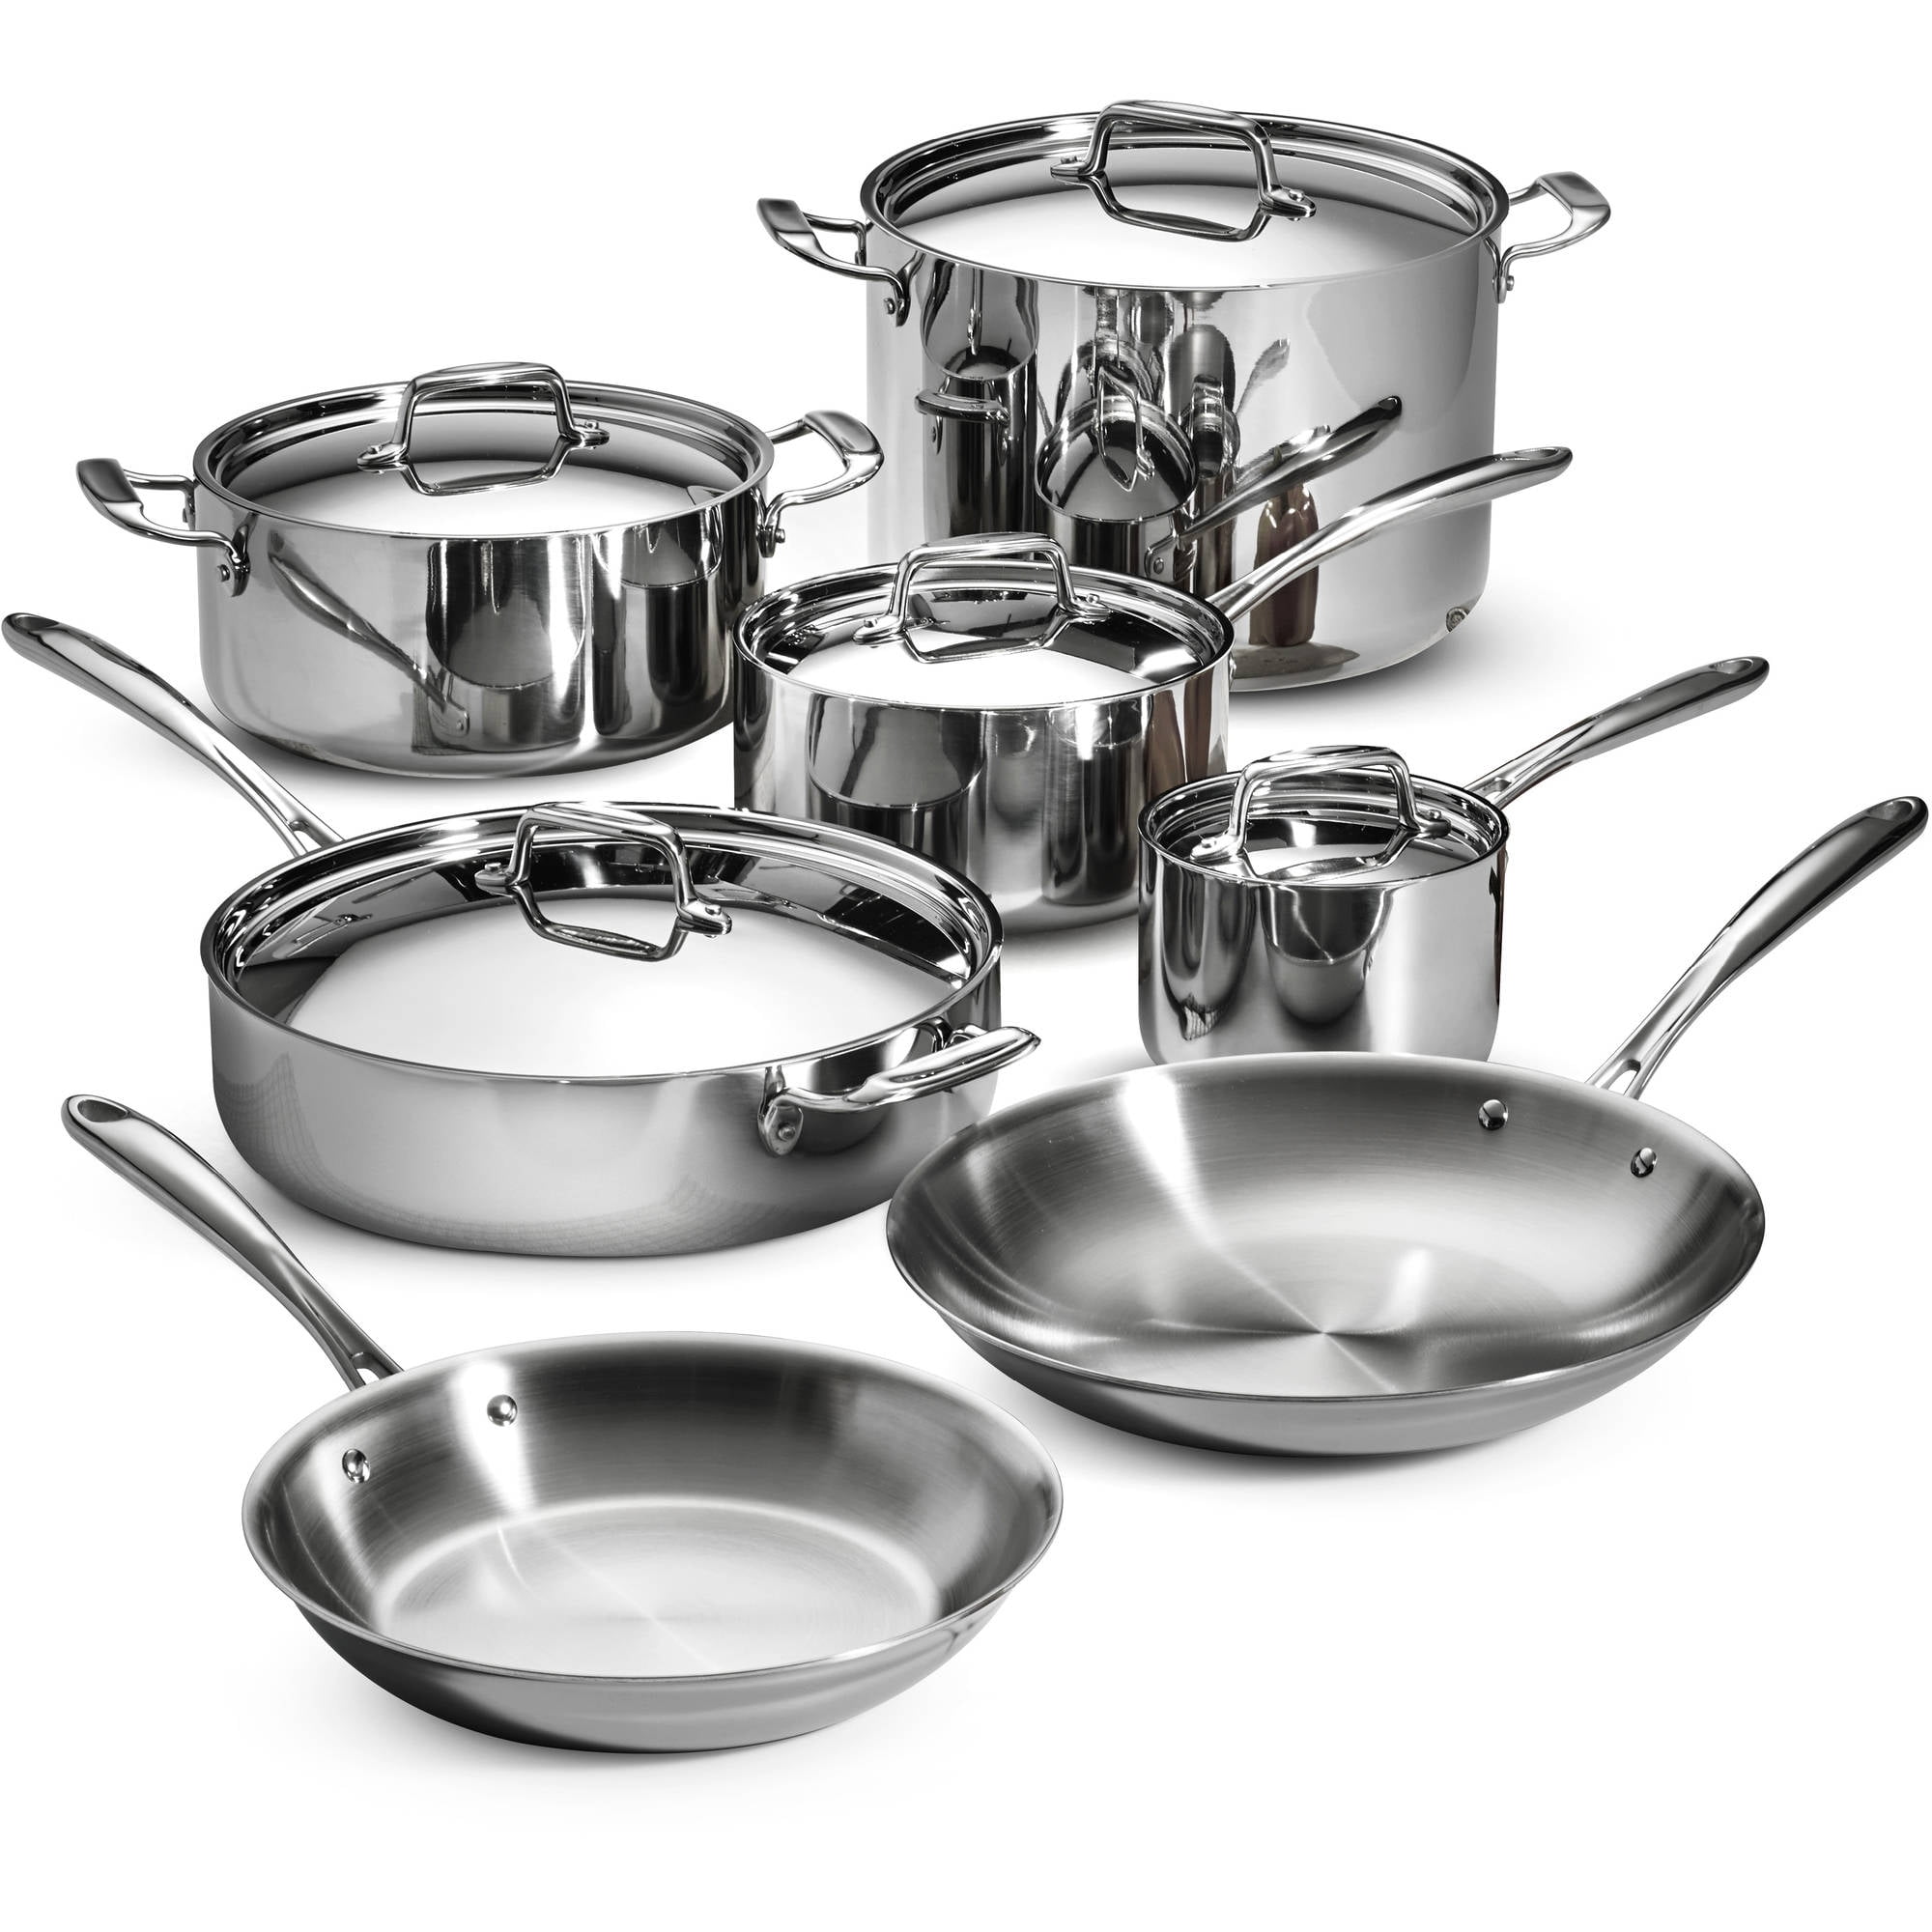 Tramontina 12-Piece Stainless Steel Tri-Ply Clad Cookware Set Tramontina 12 Piece Stainless Steel Cookware Set